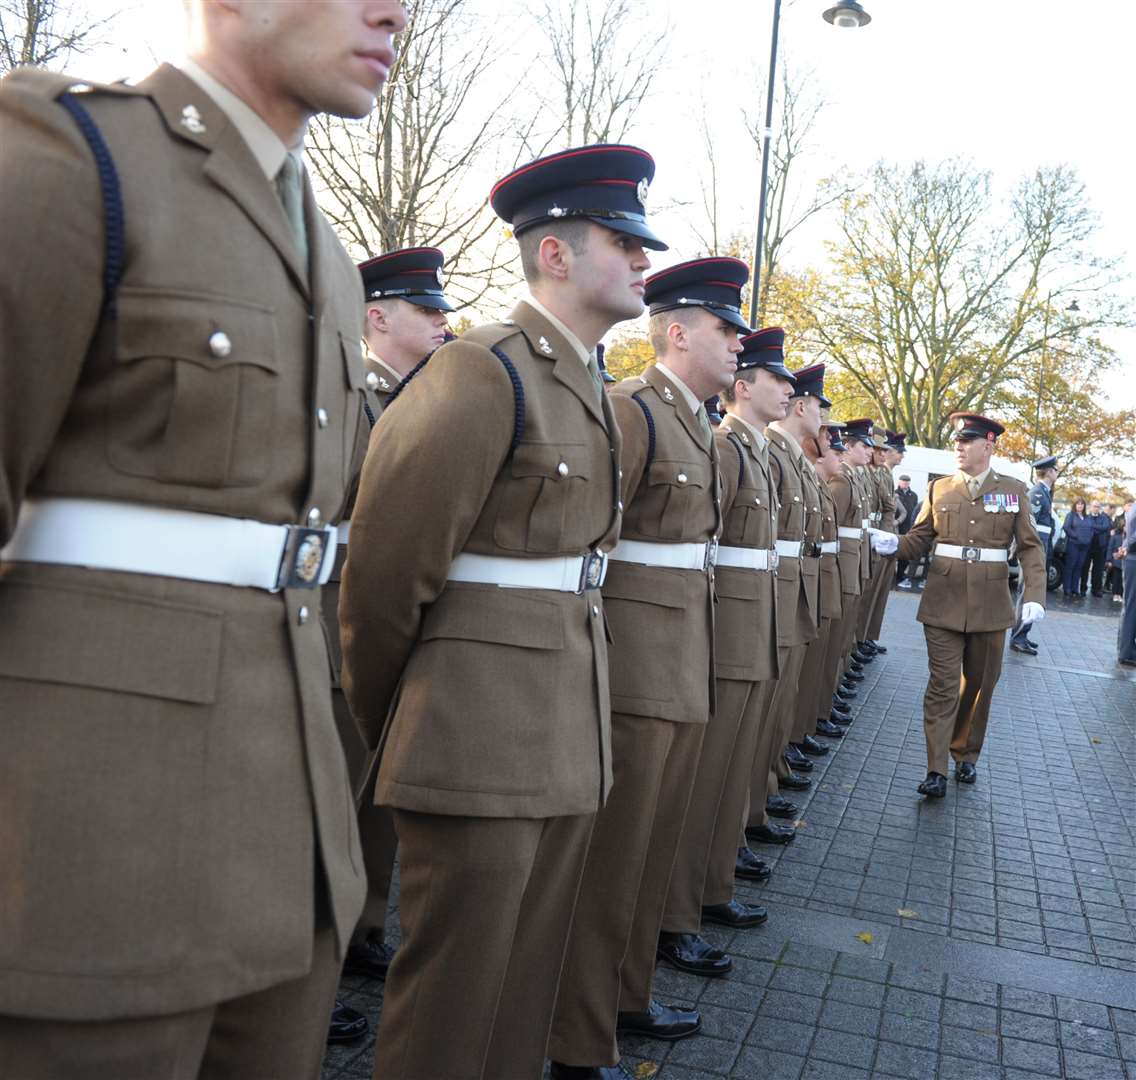 There are 1.8m ex-service personnel in the UK